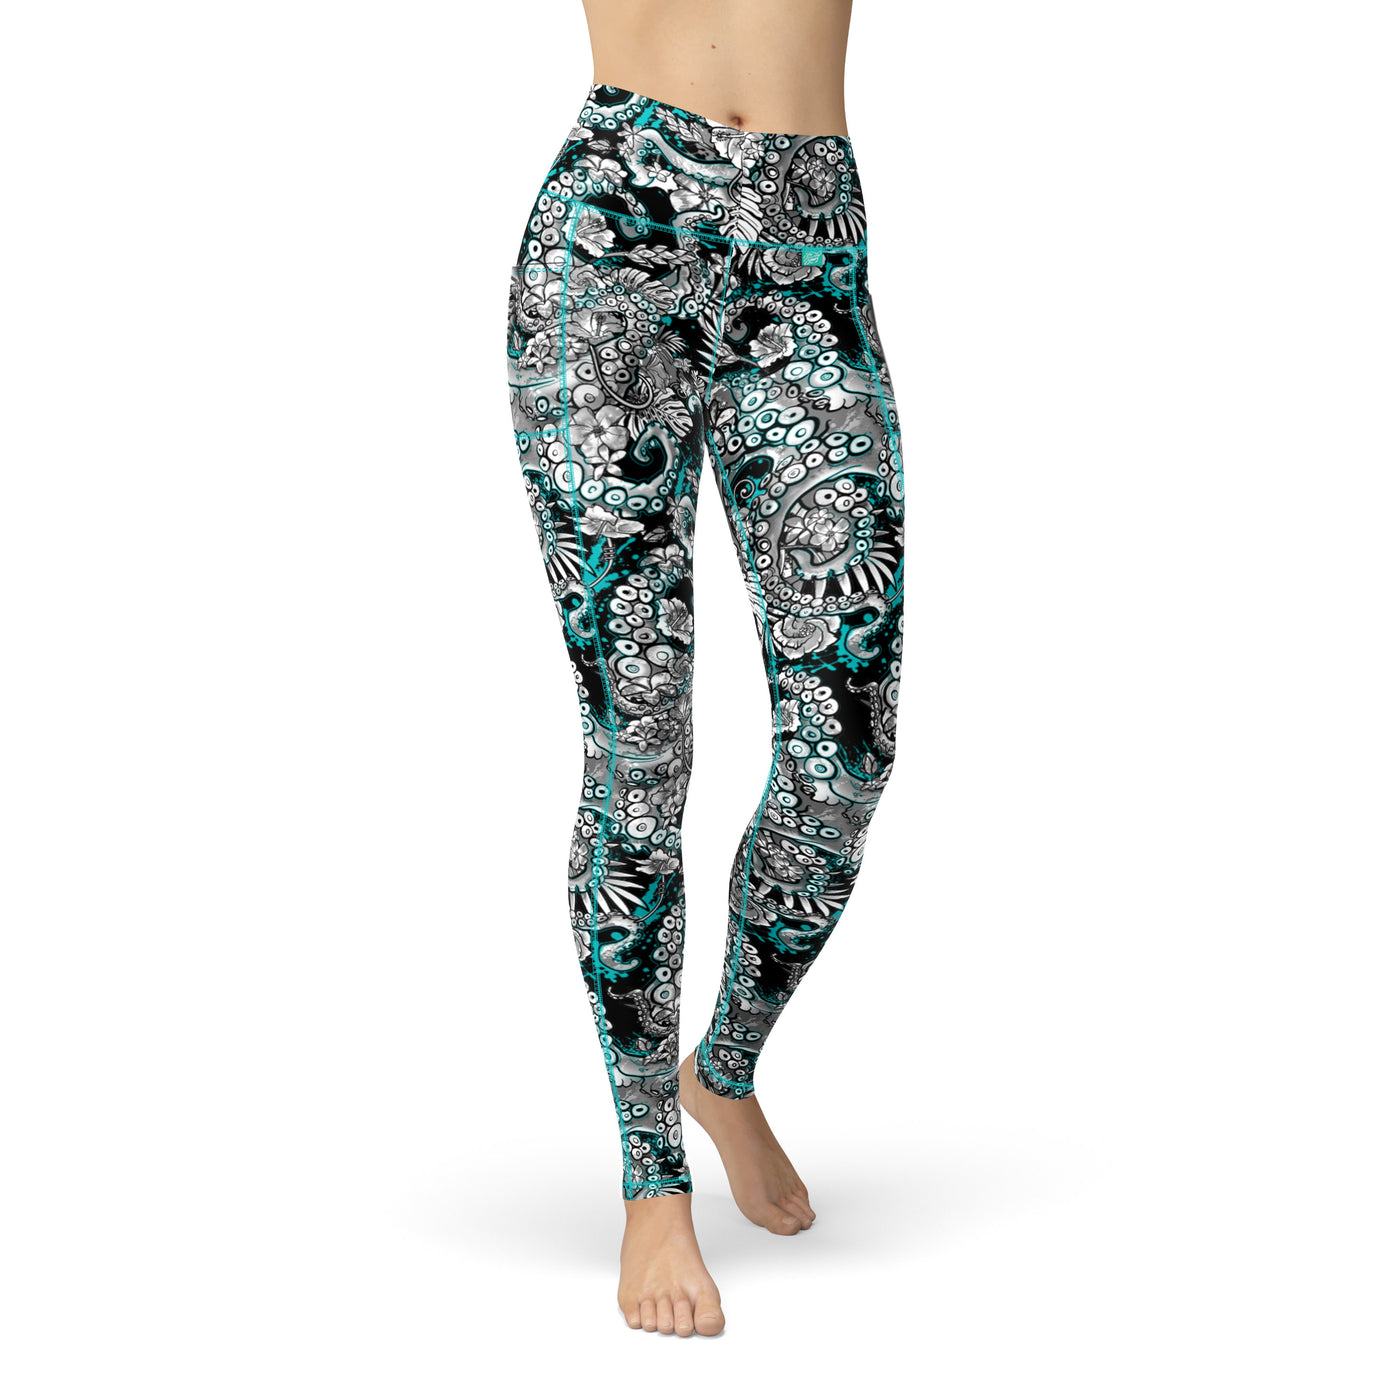 Electric Blue Octopus Leggings – Spacefish Army